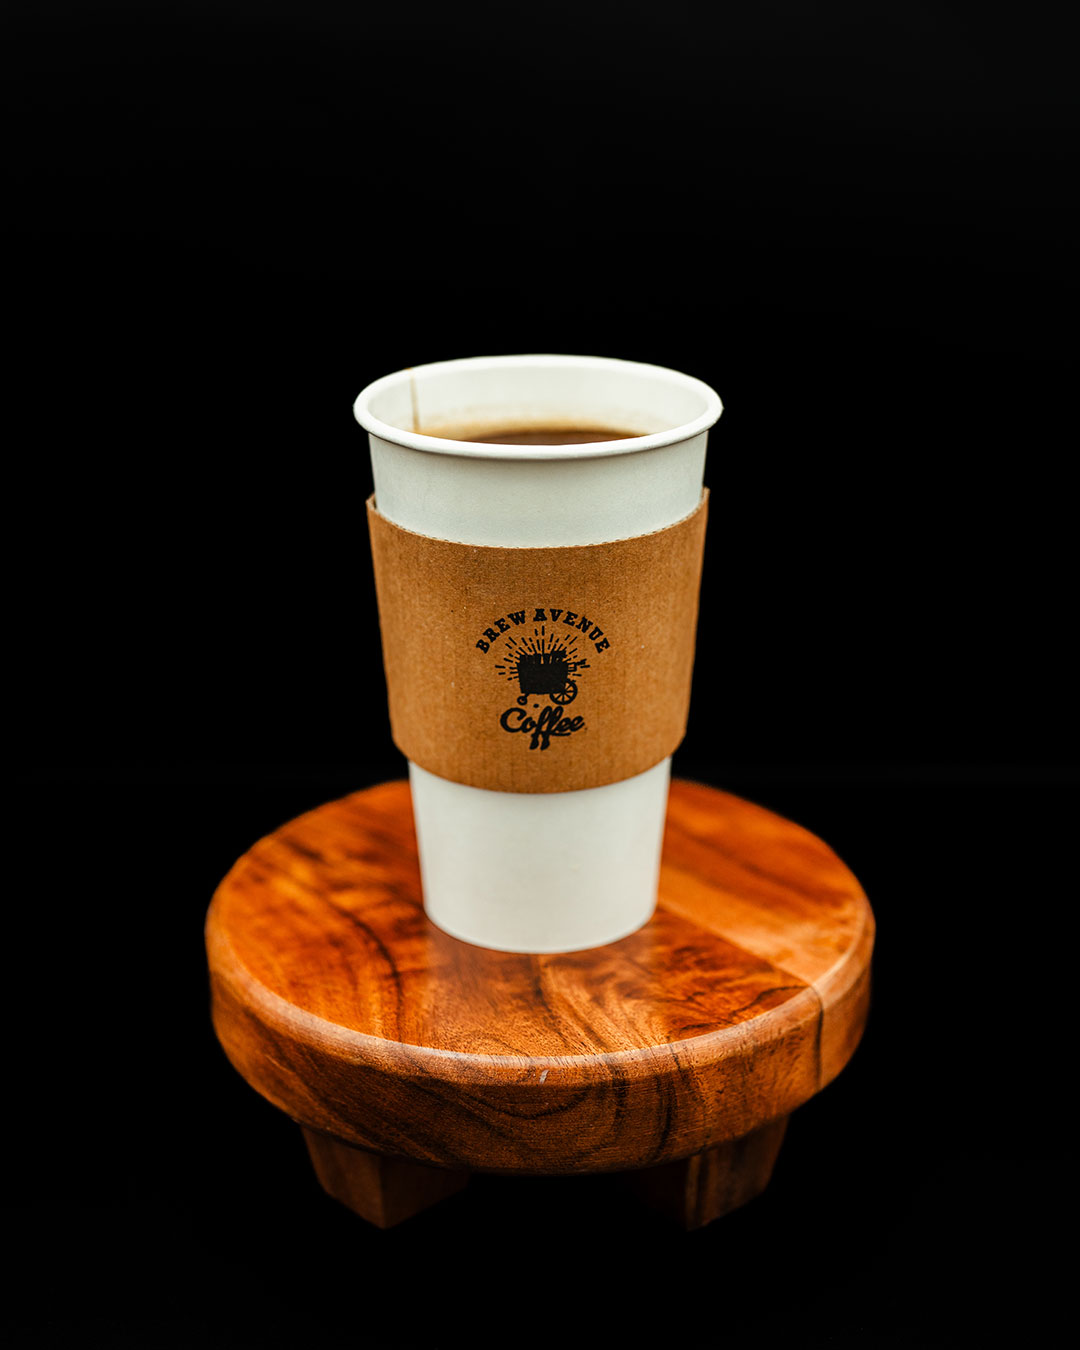 A white cup with a sleeve that shows the Brew Avenue Coffee logo is sitting on a wooden stool against a black studio background. The cup is filled with a hot Americano.